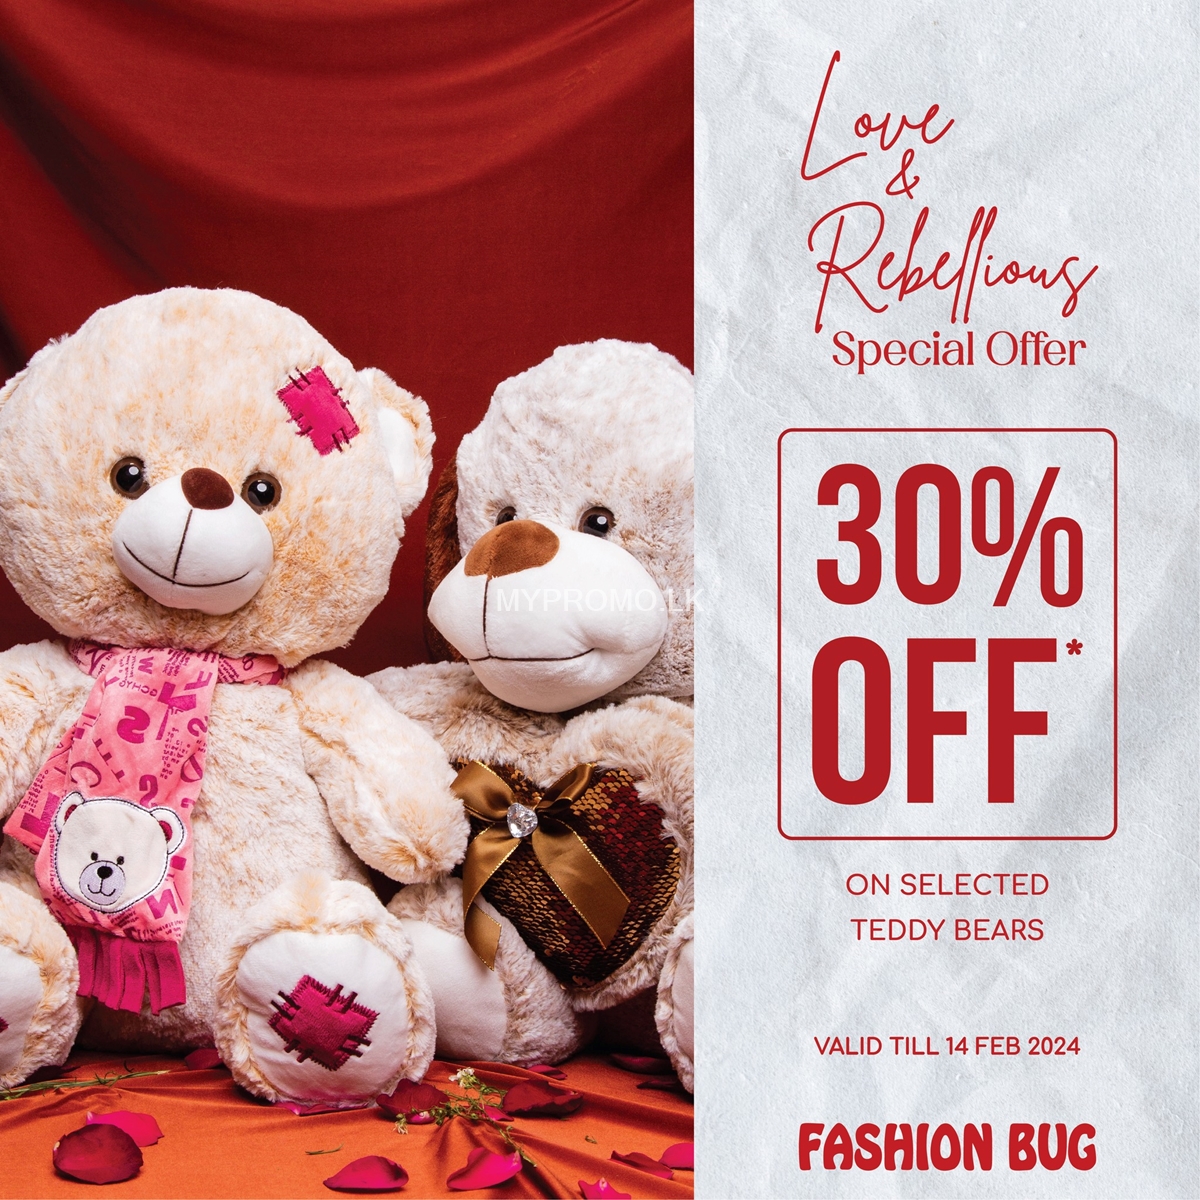 Enjoy 30% Off on selected teddy bears at any Fashion Bug outlets 